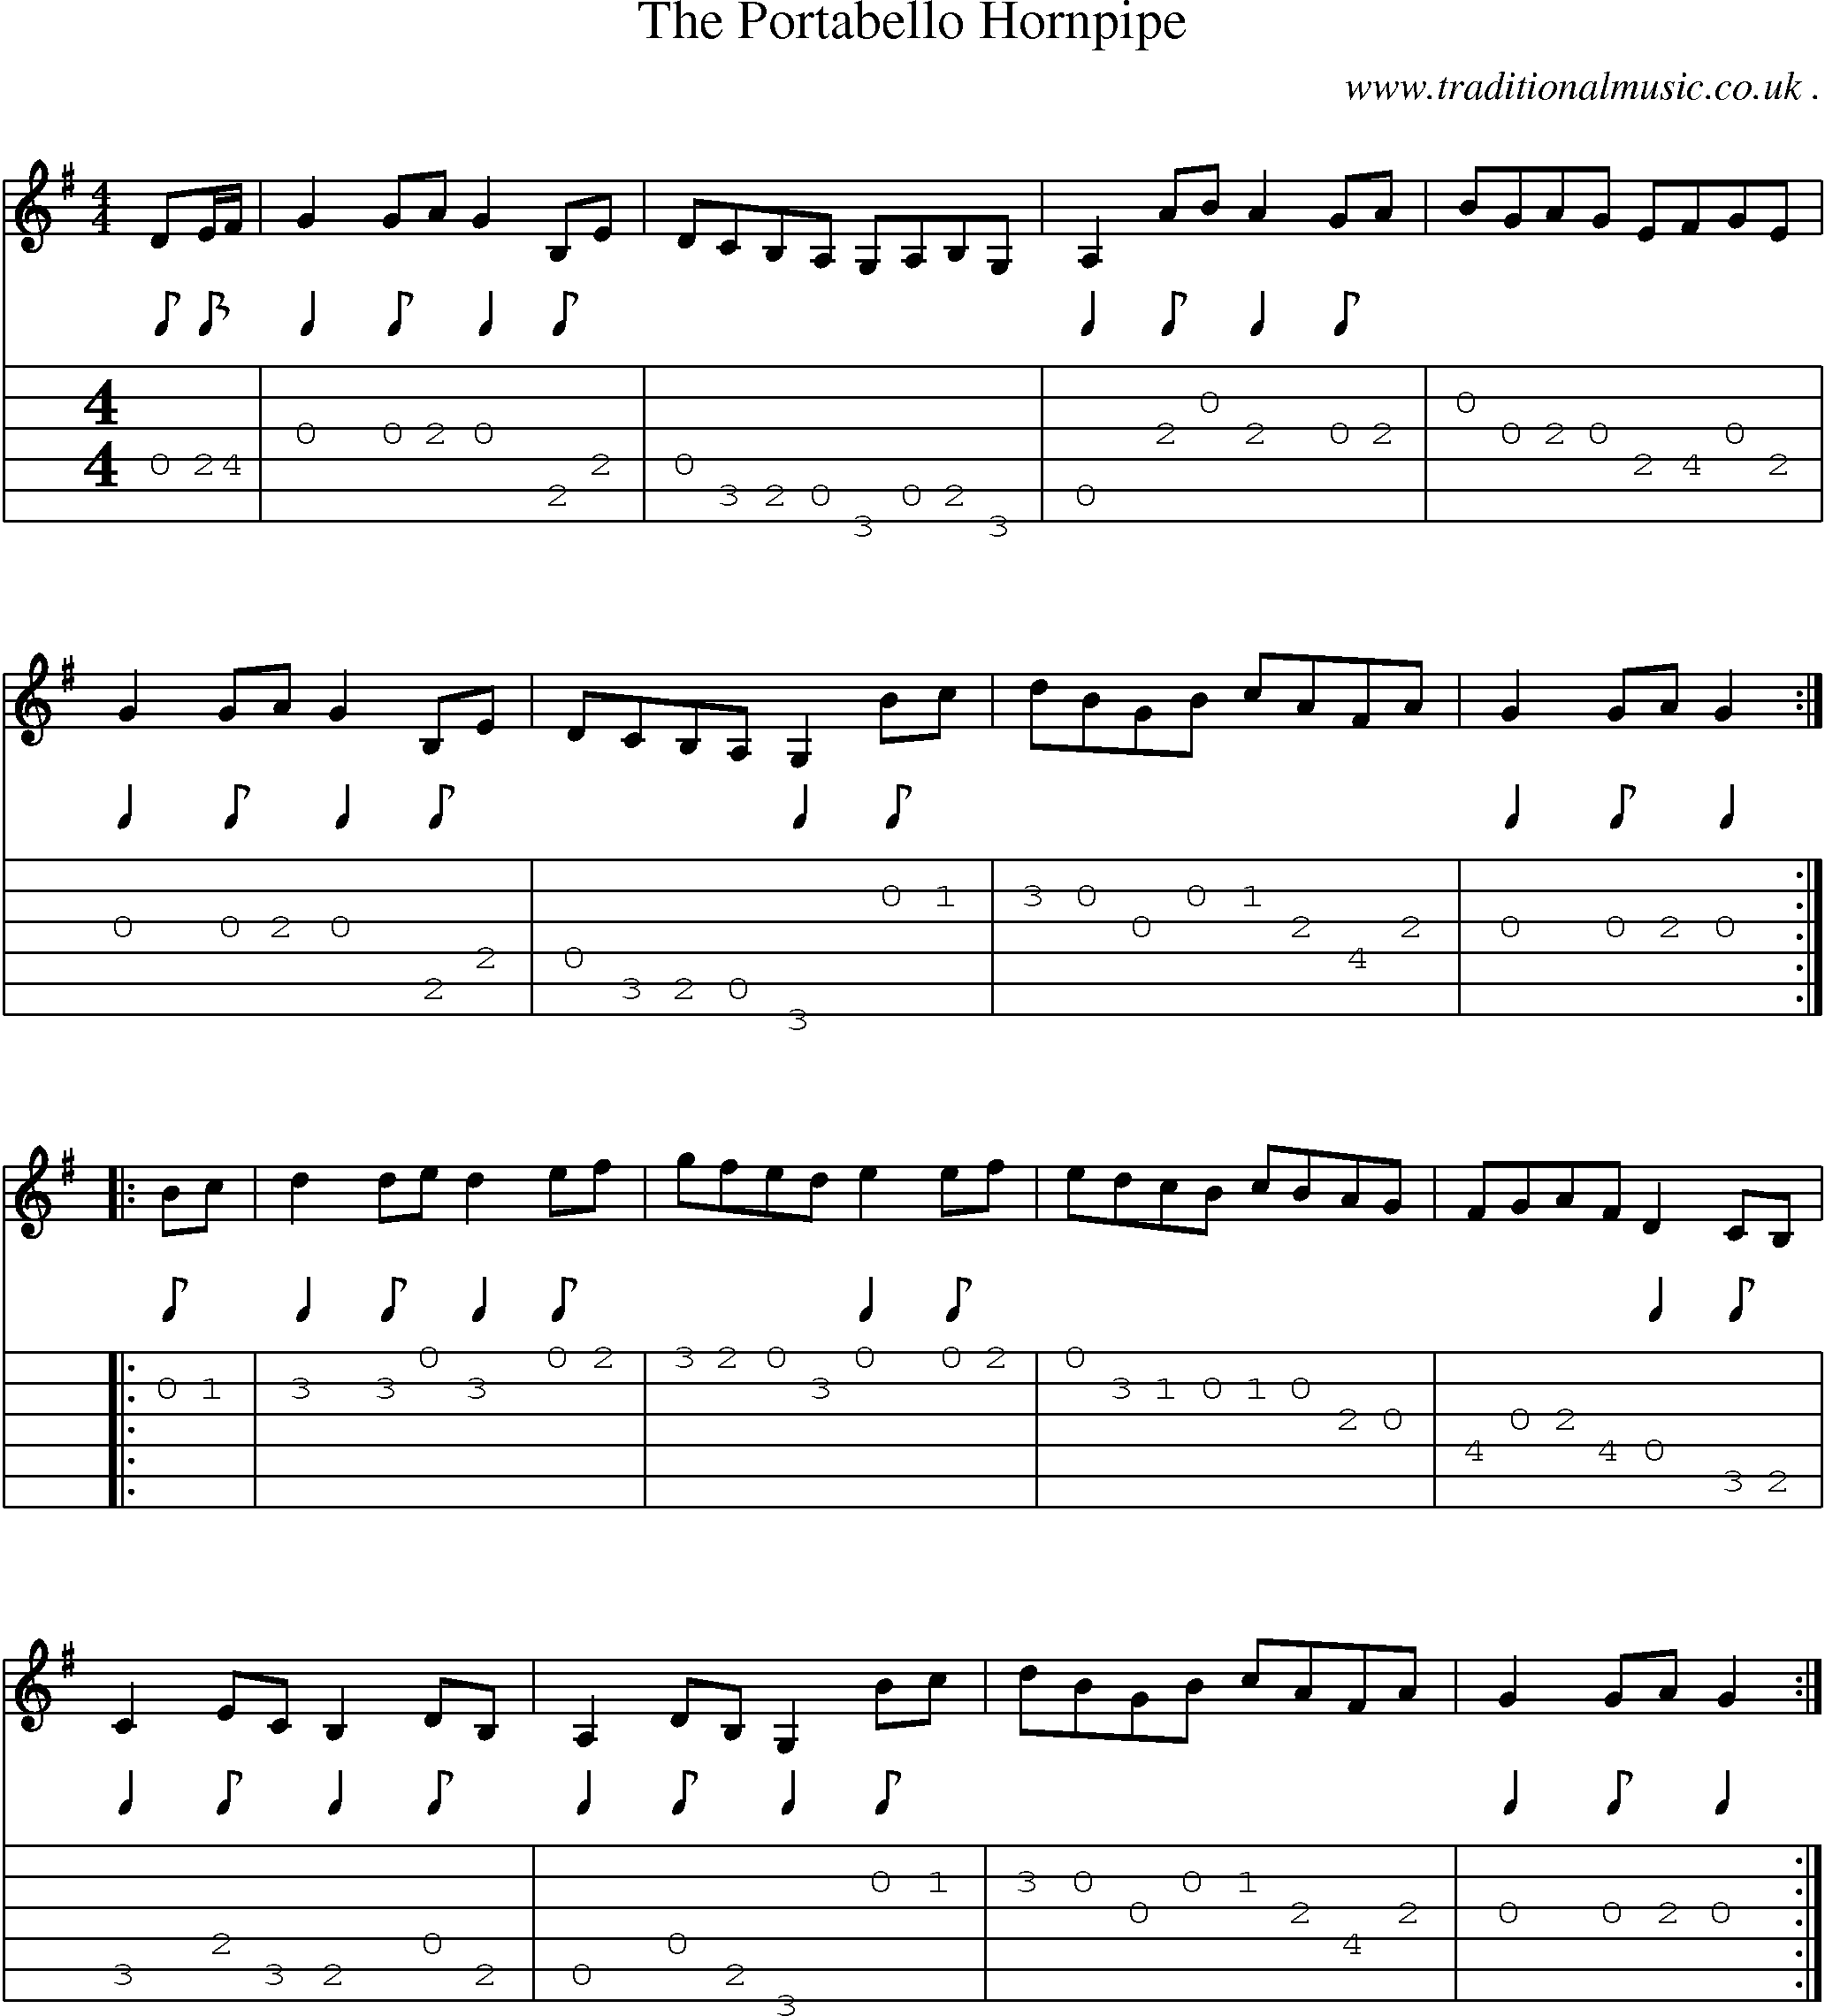 Sheet-Music and Guitar Tabs for The Portabello Hornpipe